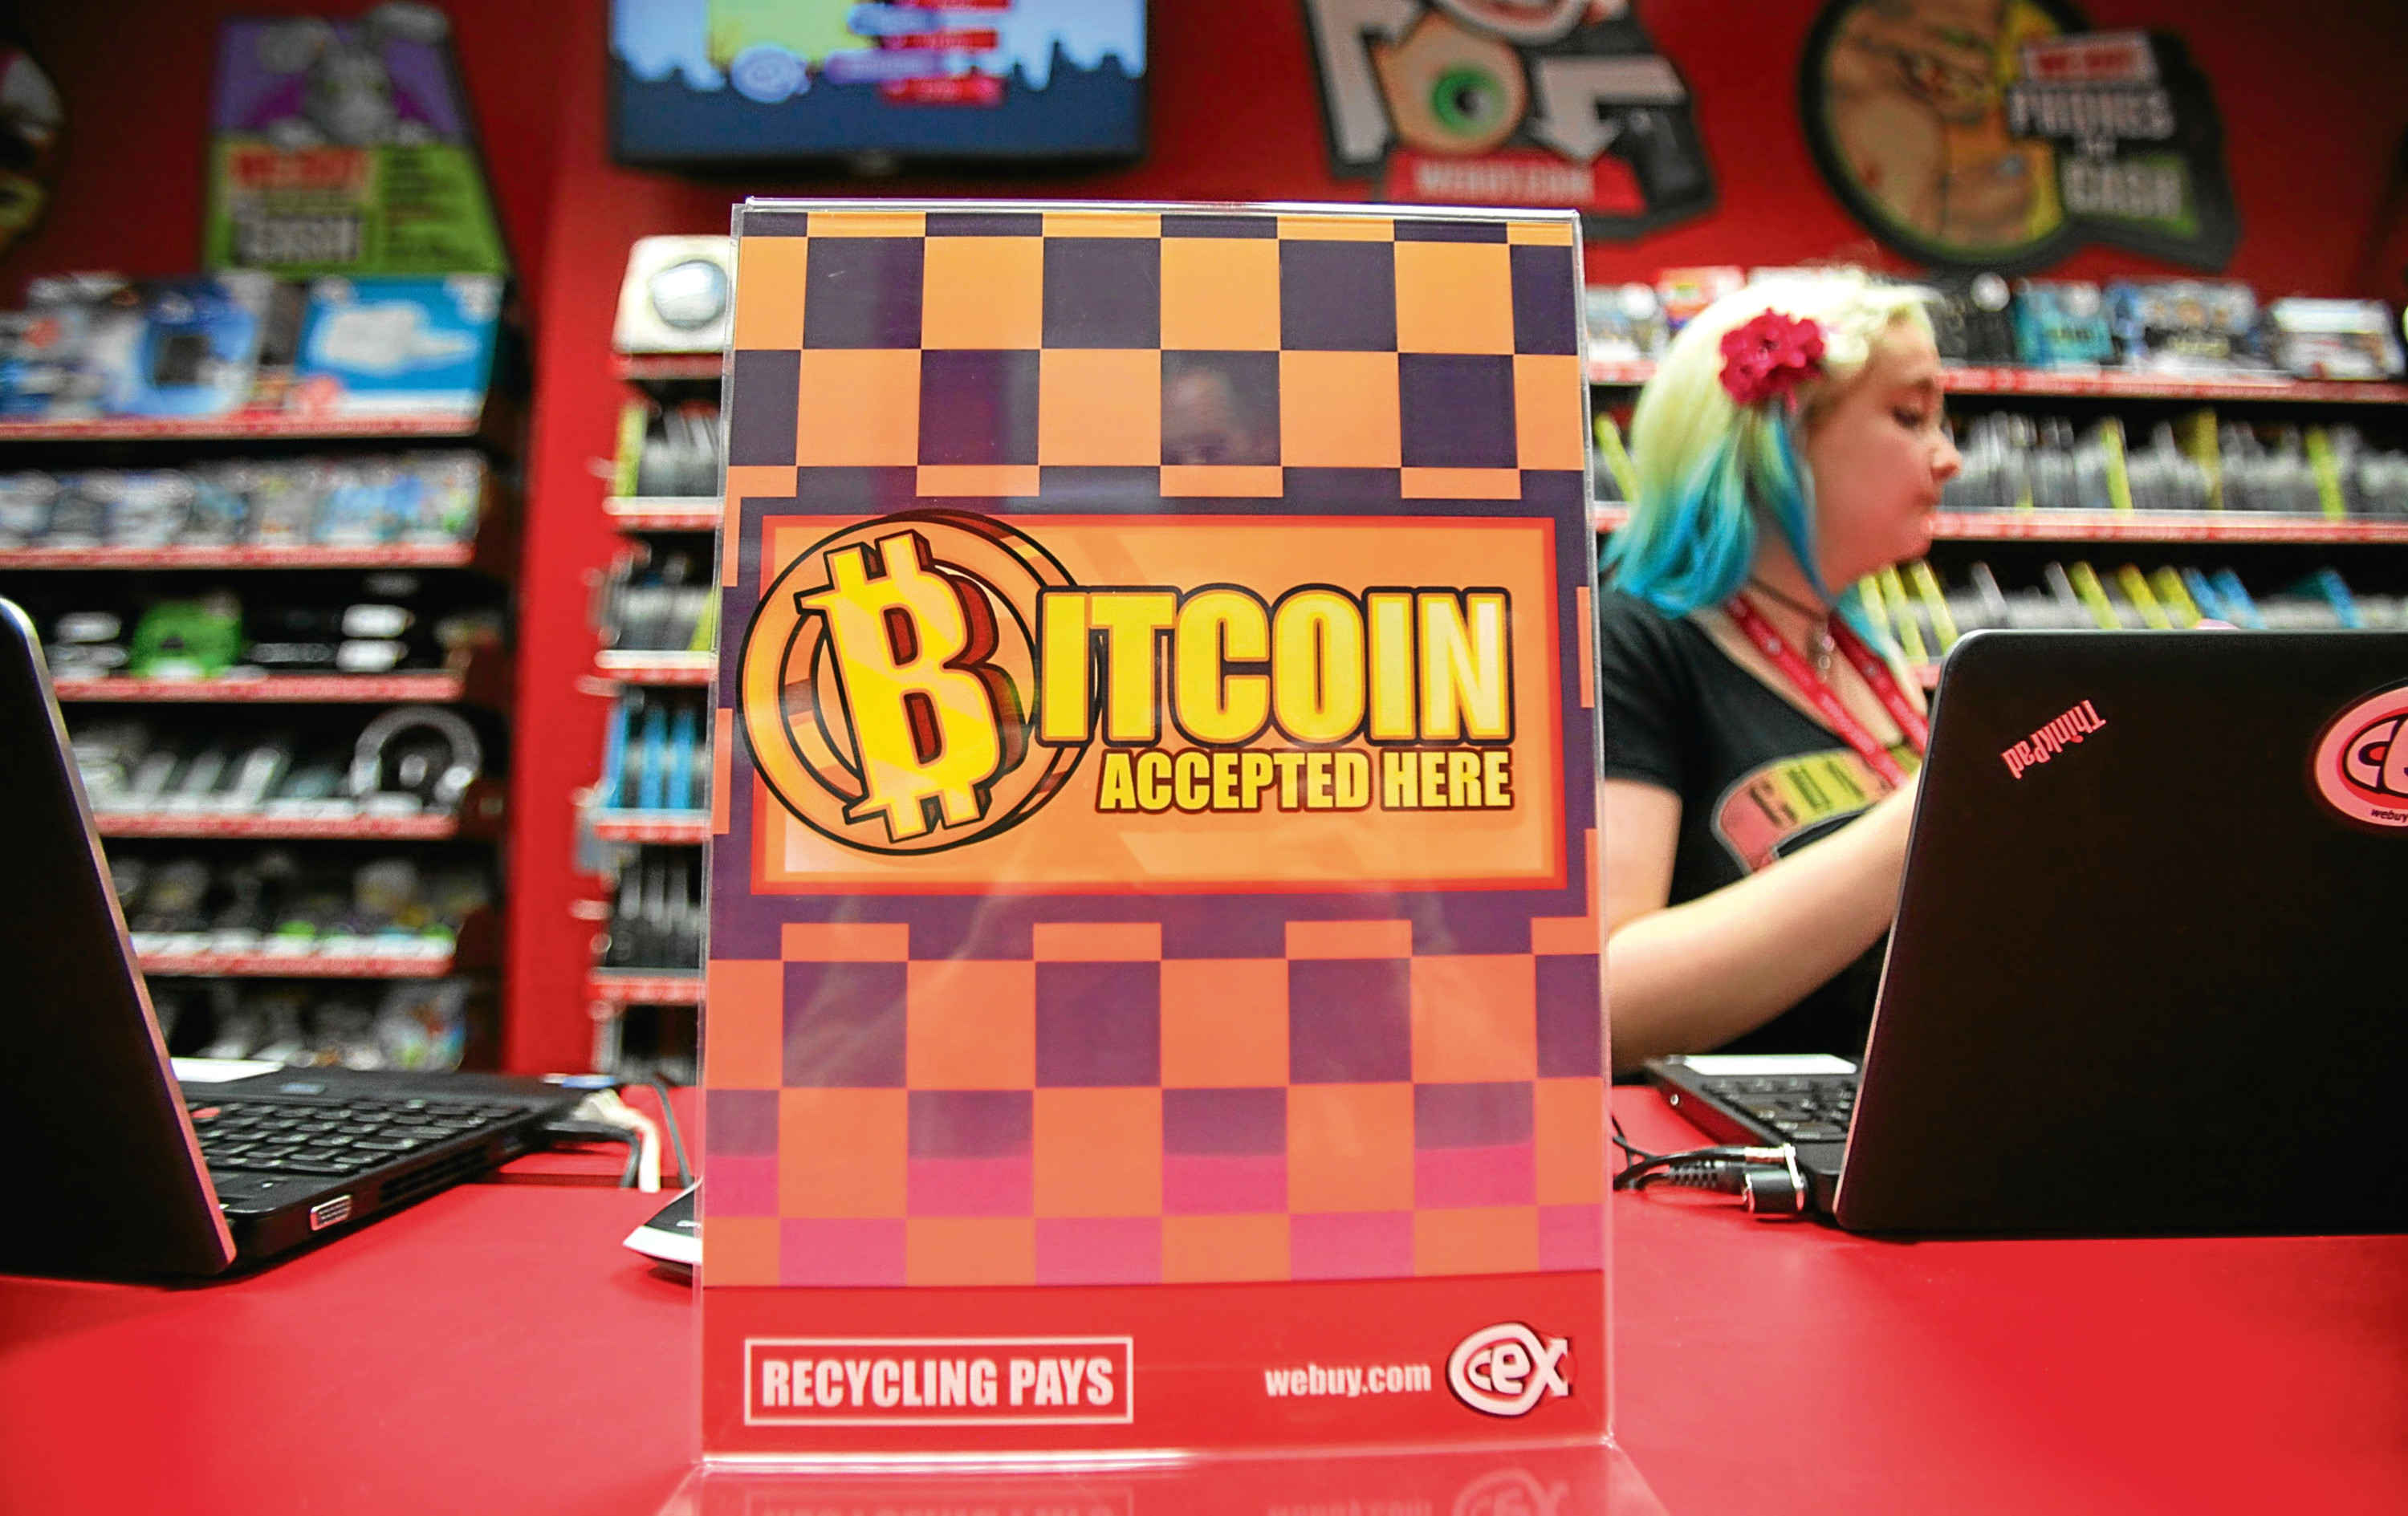 The CEX store on Sauchiehall Street in Glasgow were among the first retailers to trade exclusively in the virtual currency Bitcoin.